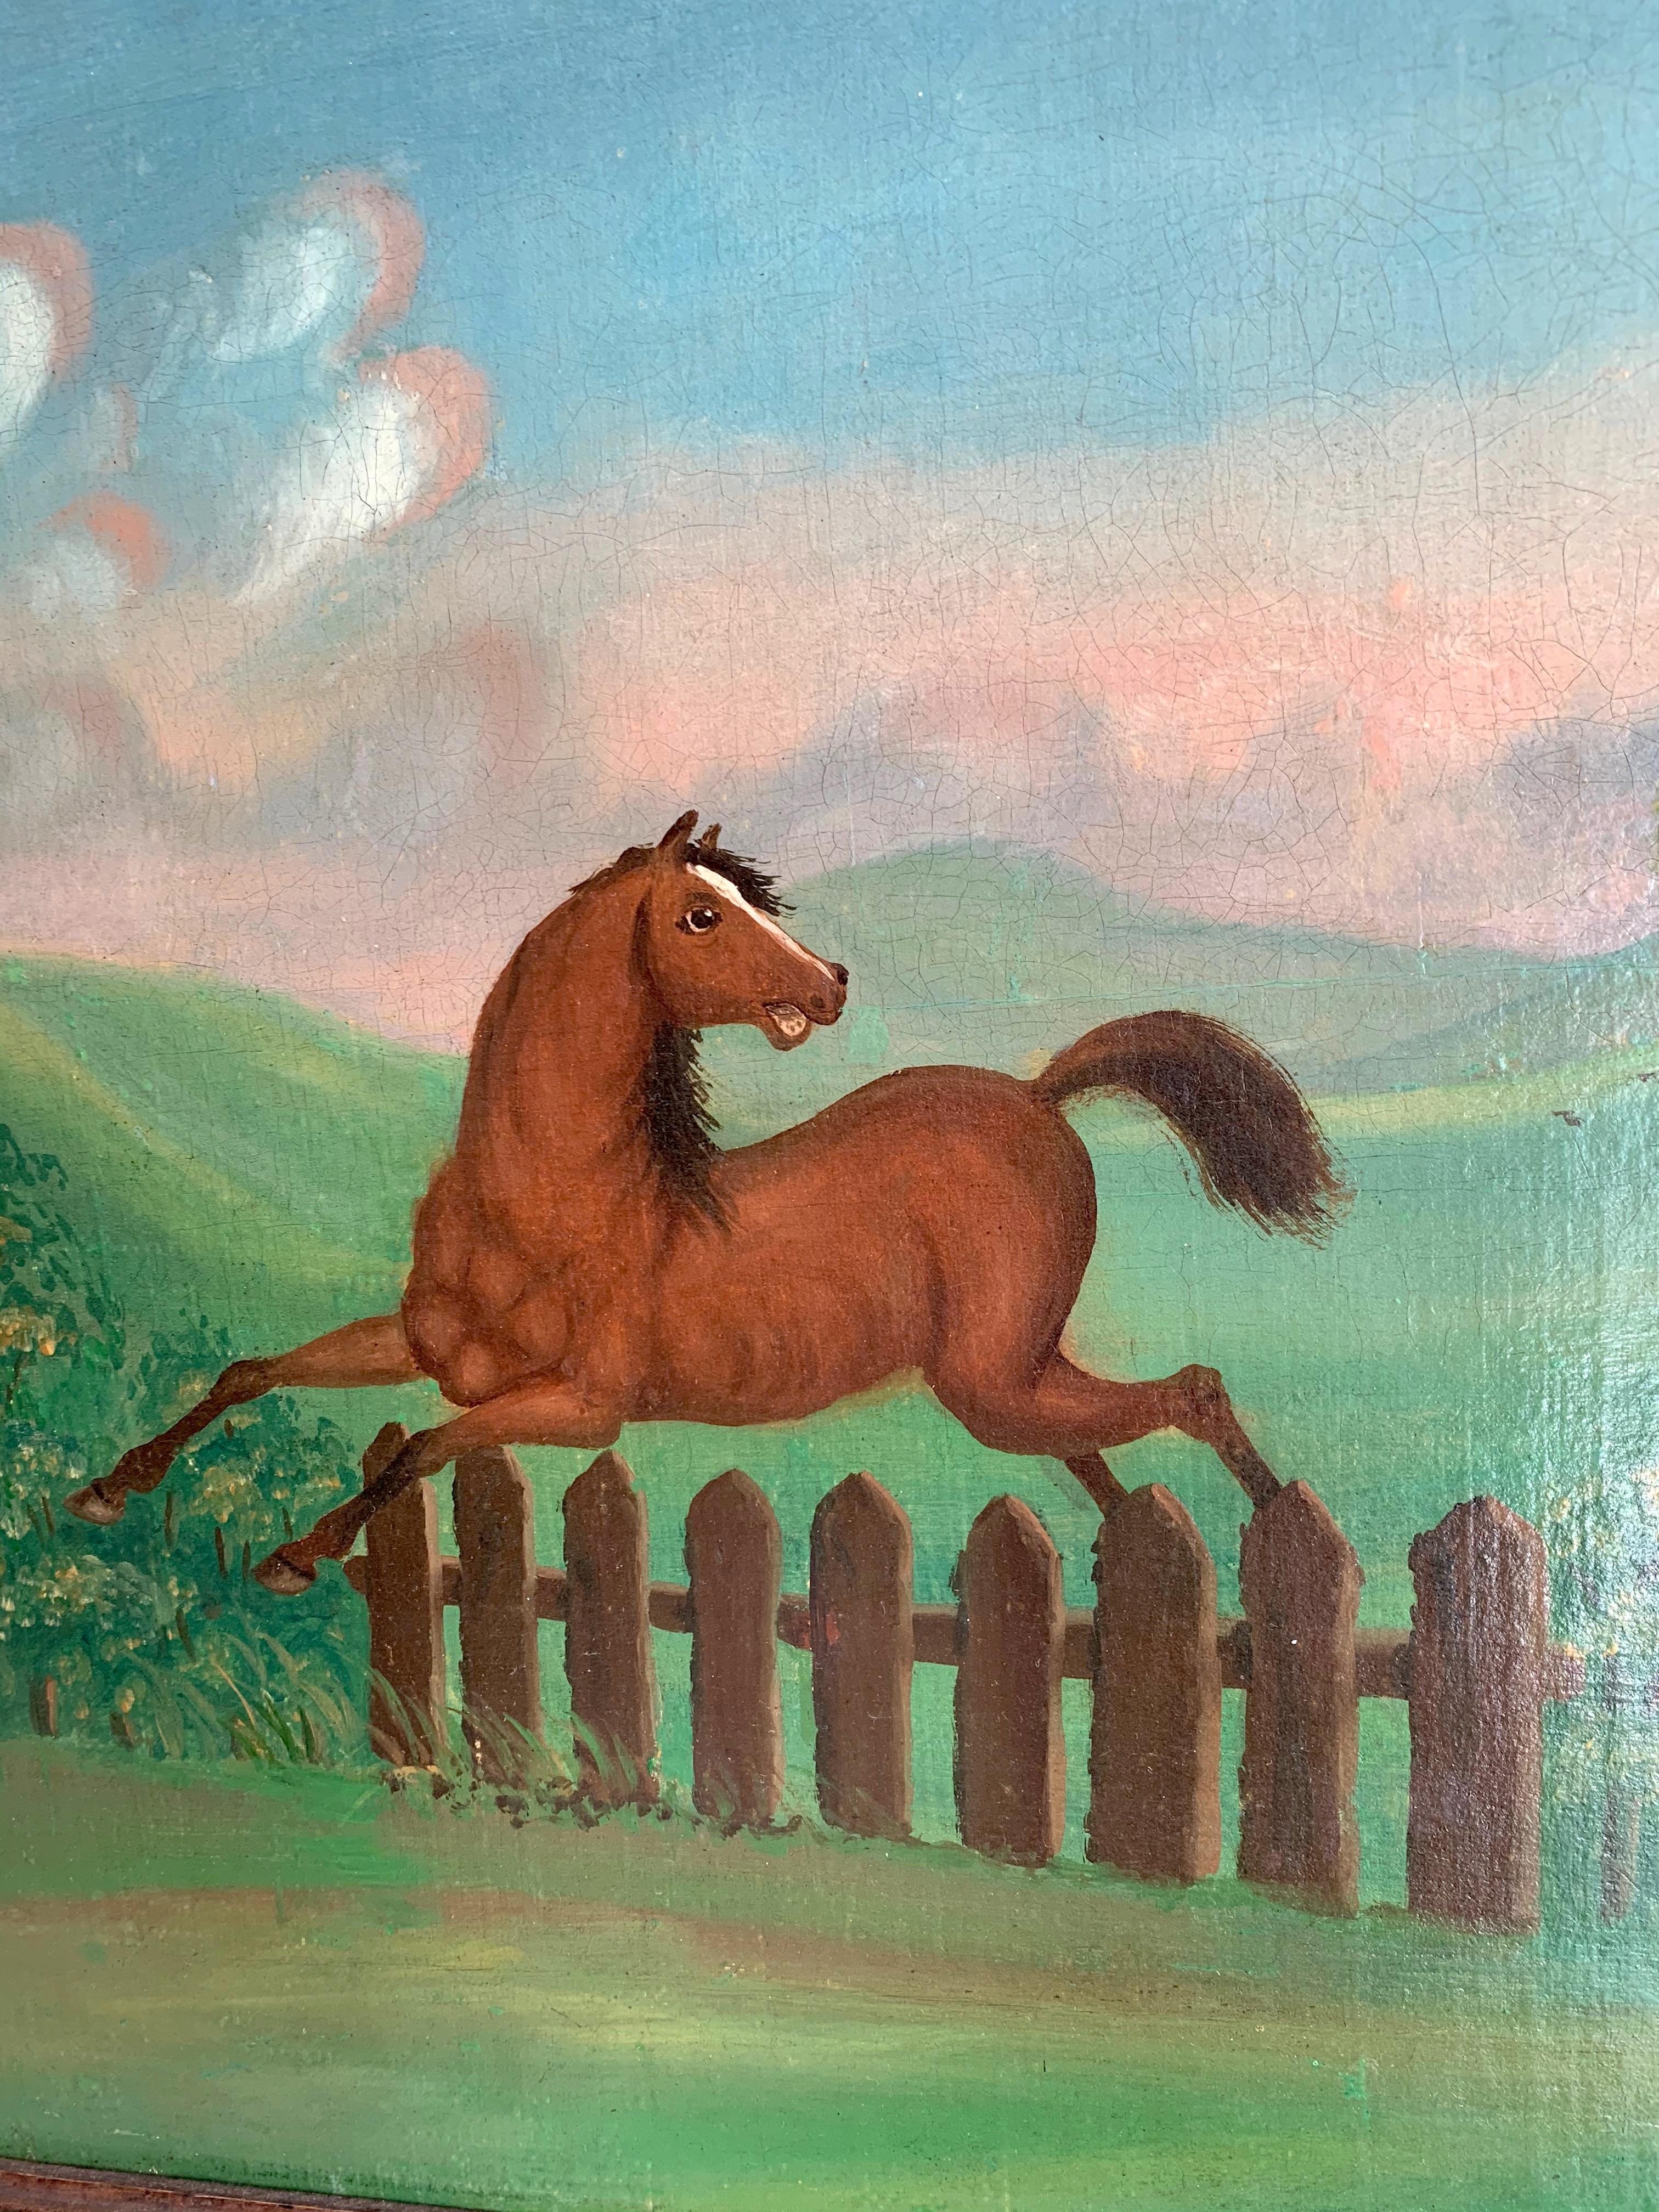 Lovely and bright oil painting of a horse jumping over a gutter. In the background we see a lovely hilly landscape, lively colorful clouds and a hunter aiming a rifle.